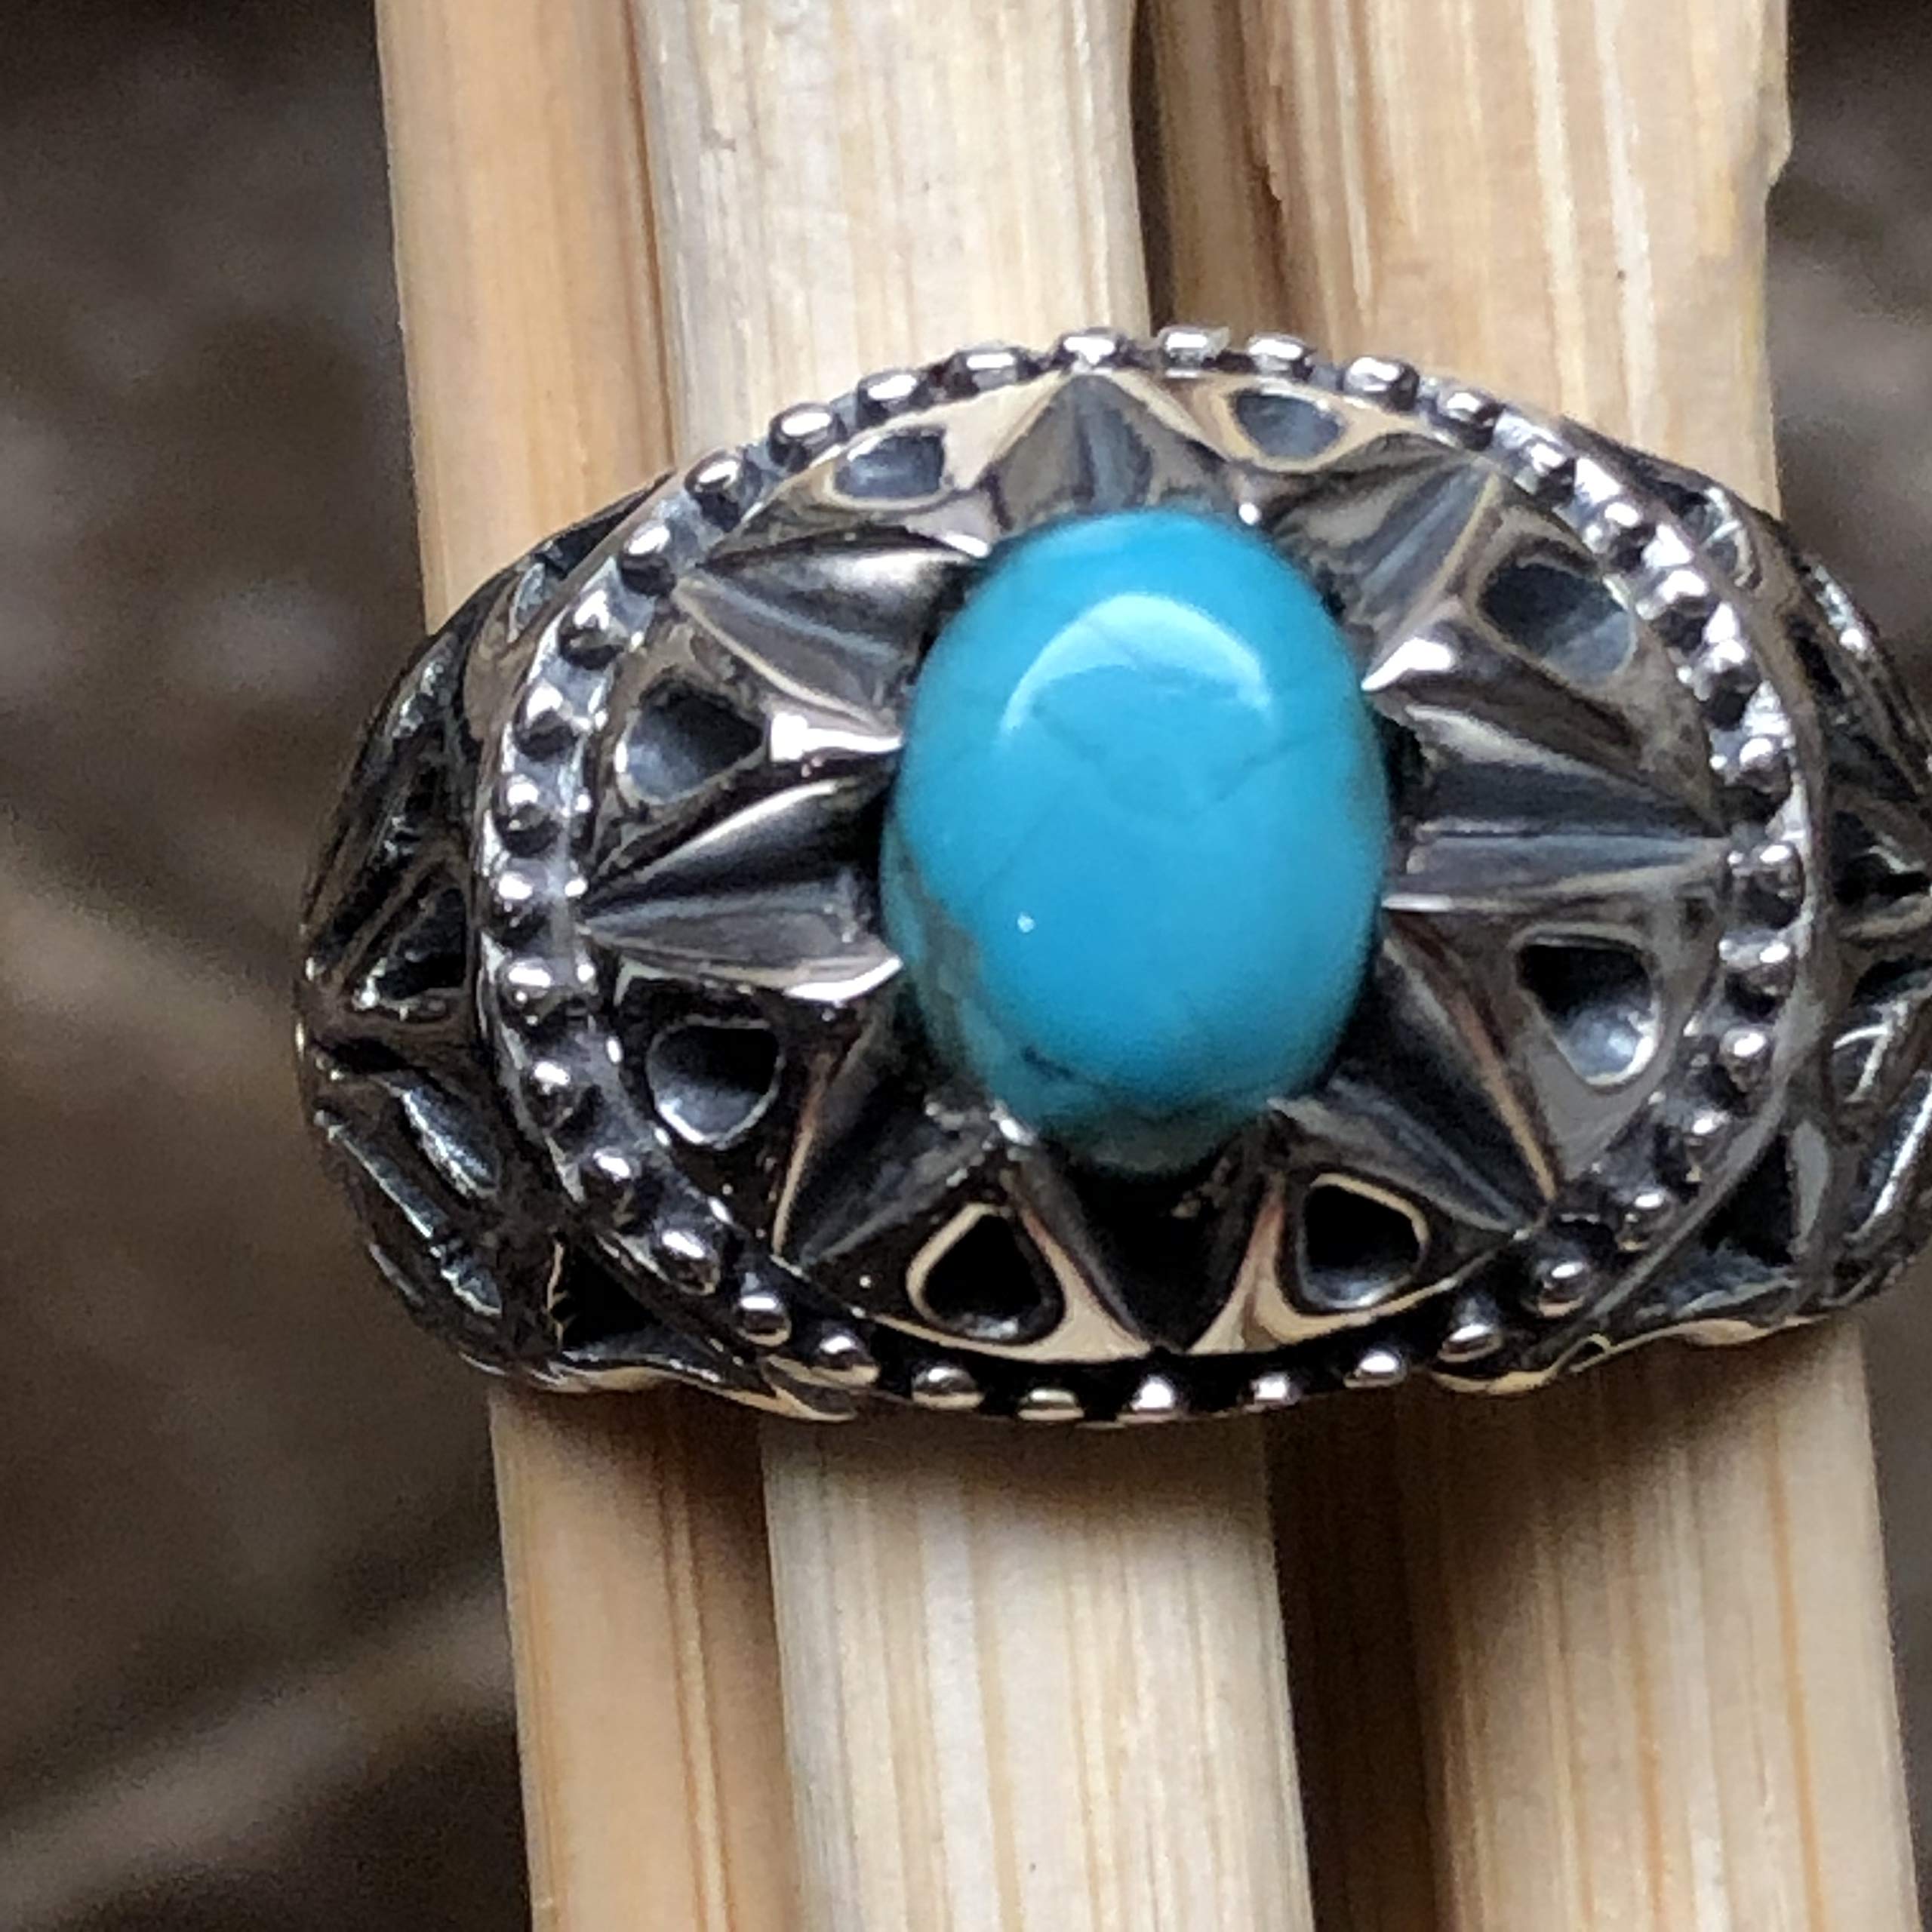 Blue Mohave Turquoise 925 Solid Sterling Silver Men's Ring Size 8, 9, 10, 11, 12 - Natural Rocks by Kala